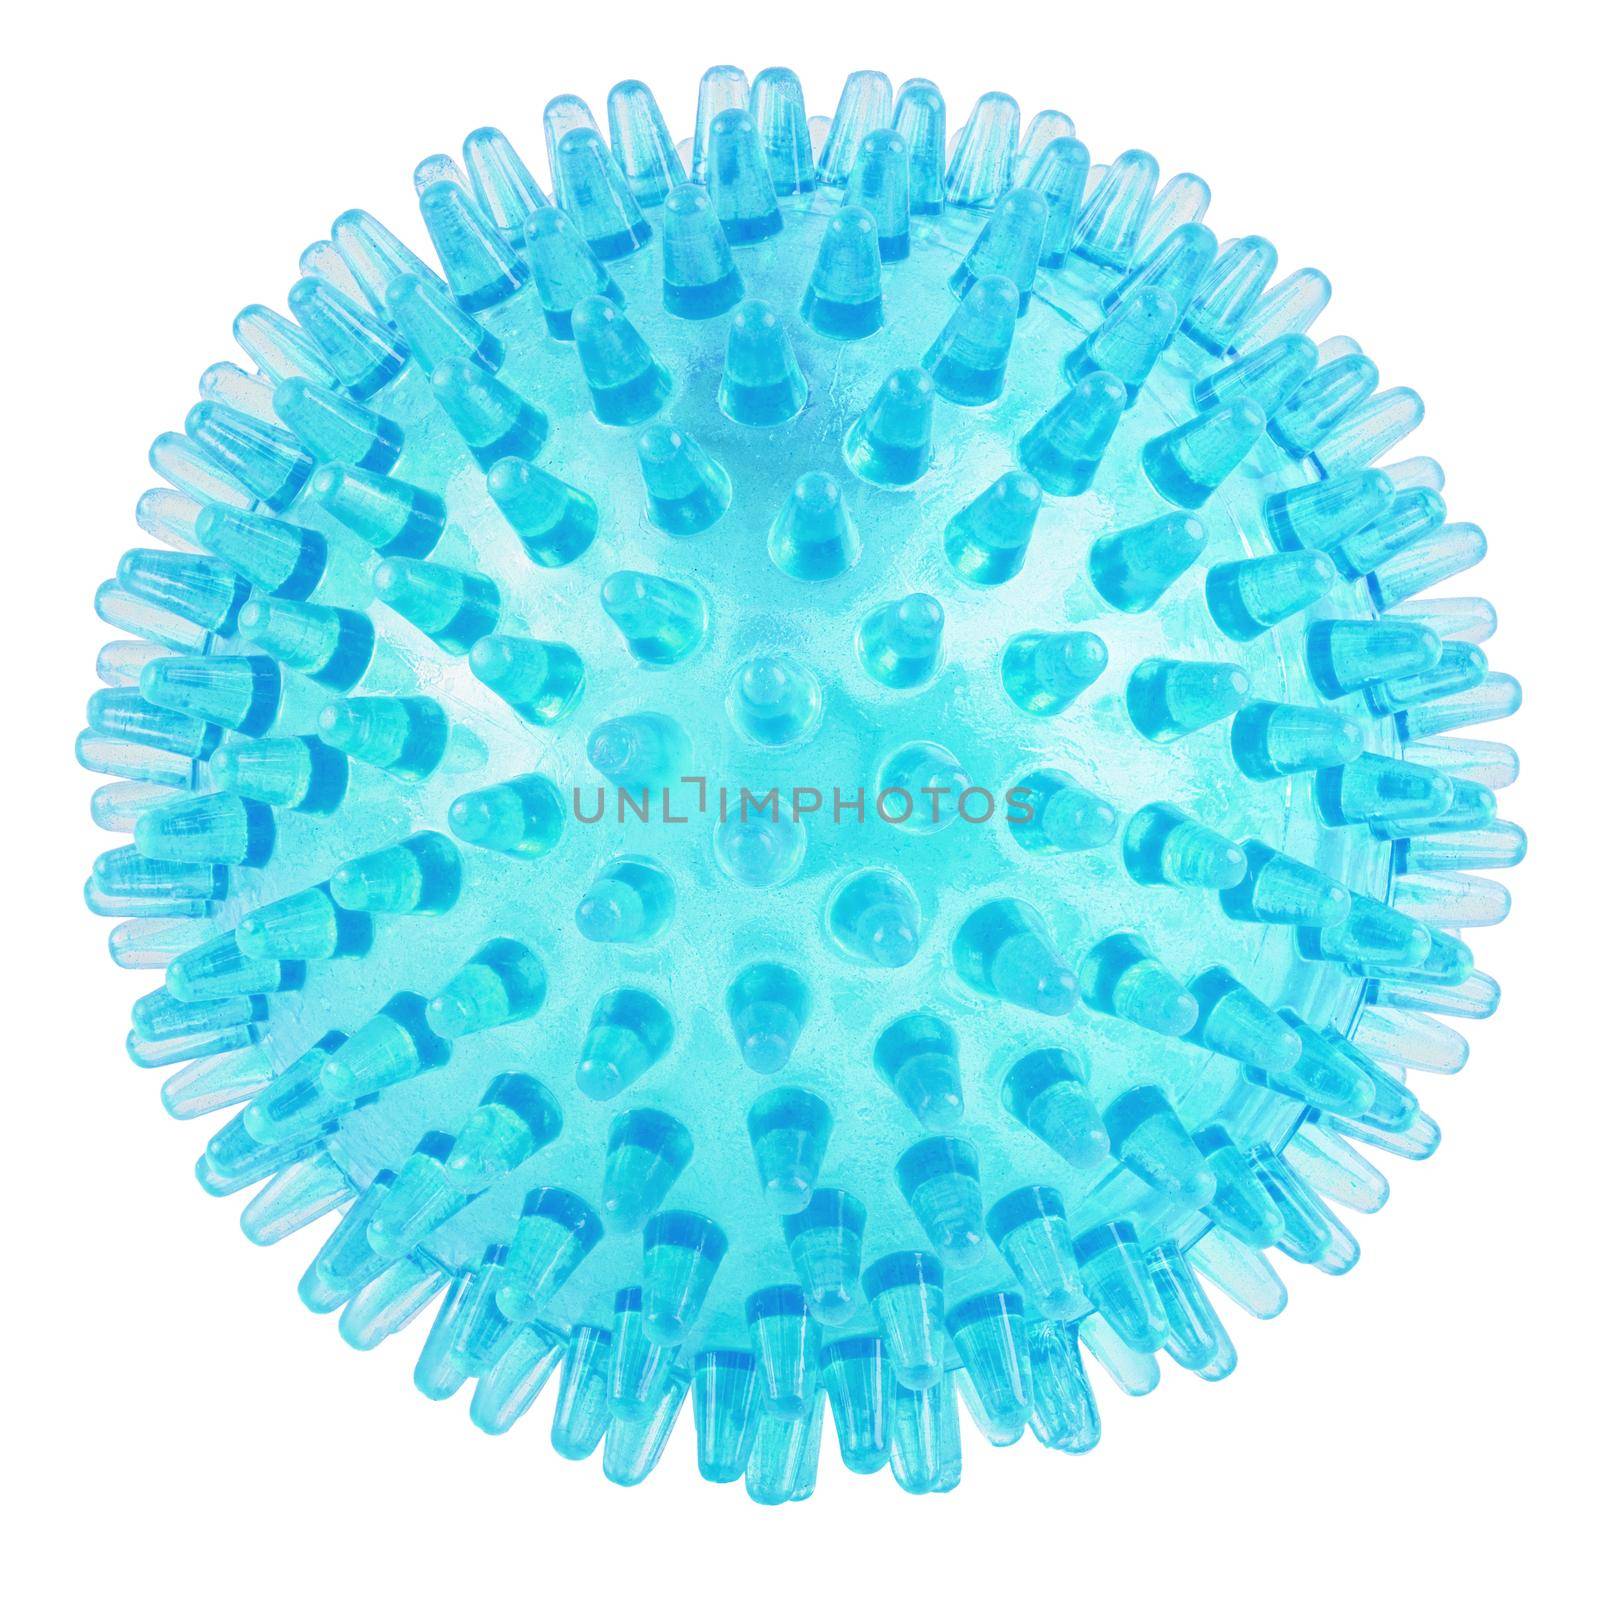 transparent cyan blue spiked plastic ball isolated on white background - massager, dog toy and COVID-19 symbol by z1b